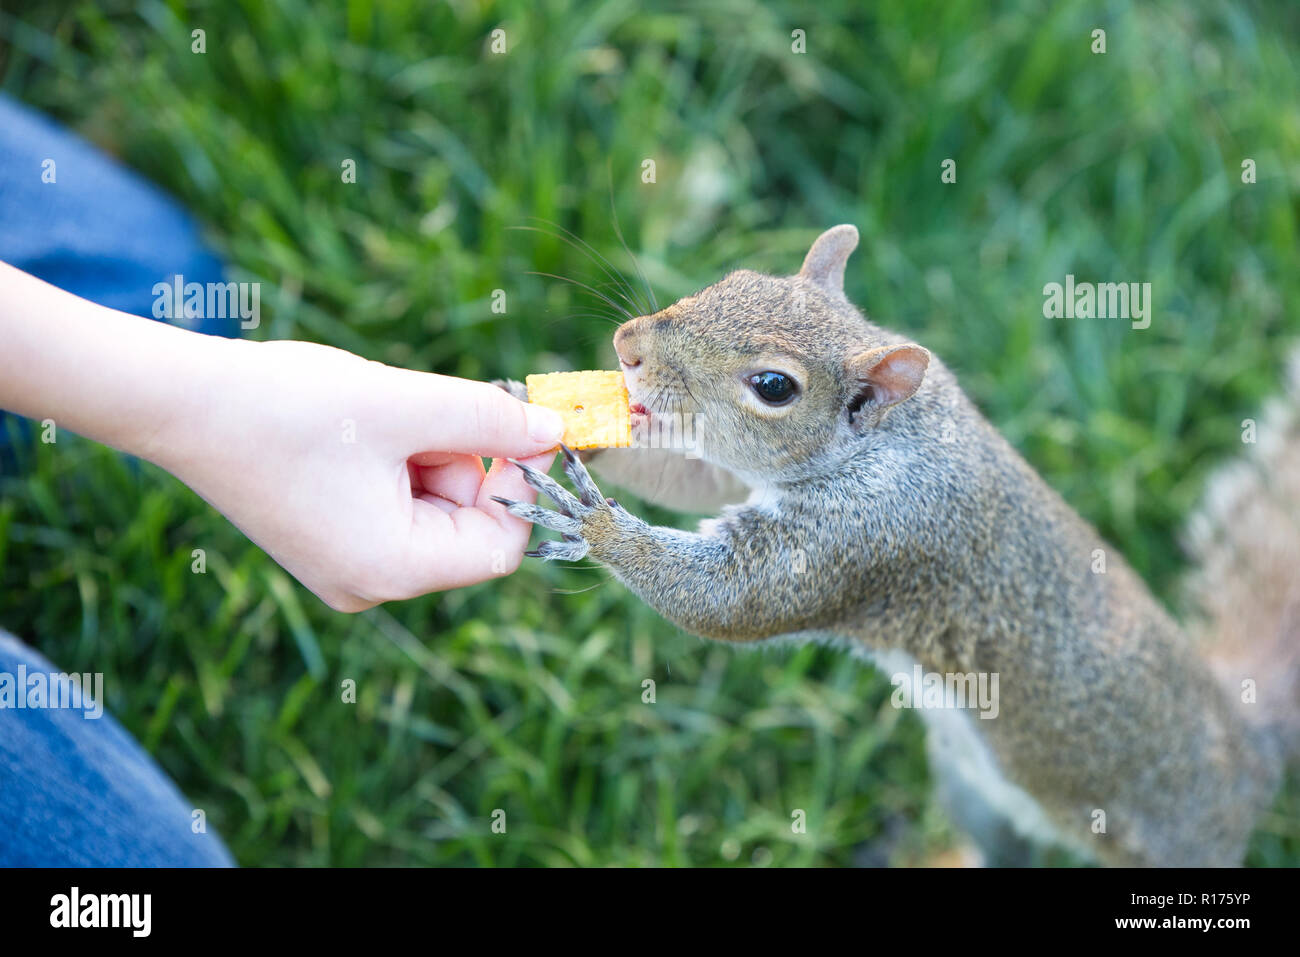 A hungry squirrel feeds on leftovers in a public park at the commons in Boston, Massachusetts. Stock Photo